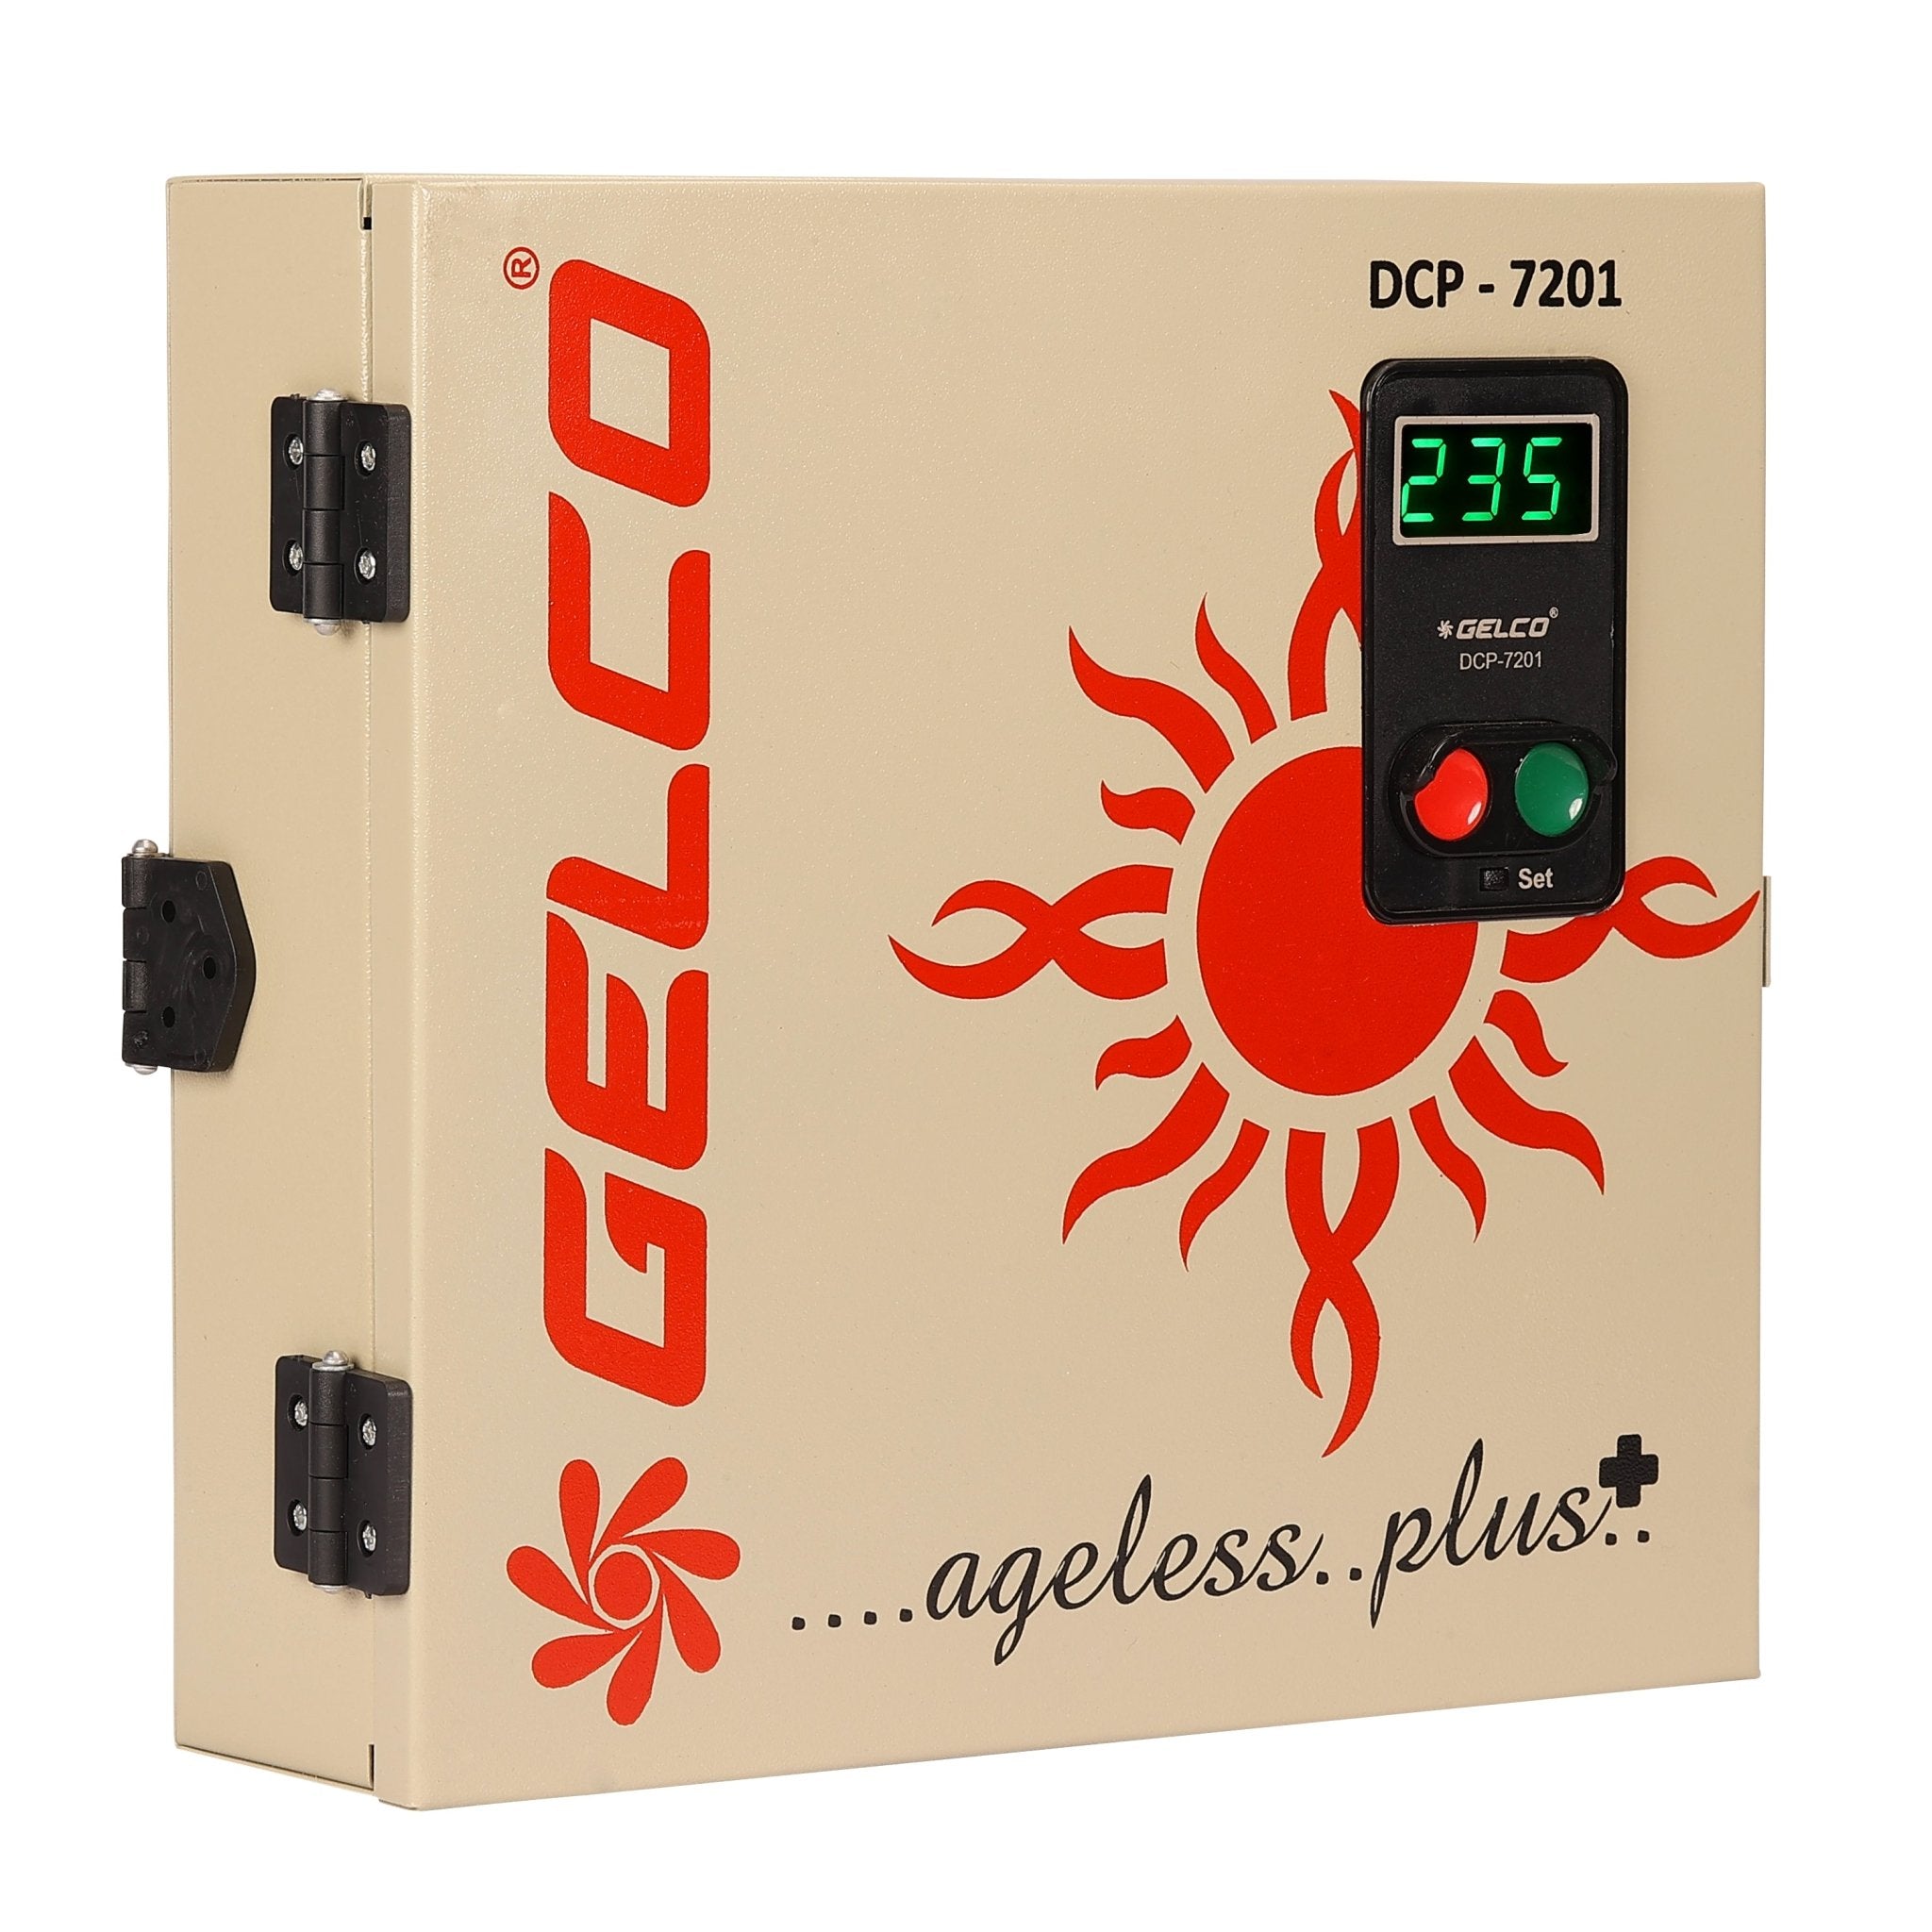 DCP 7201, Motor Starter & Control Panel, Operates and Protects All Kinds Of Submersible Motors and Pumps, Auto On/Off Function, Full Protection Against Voltage Fluctuations/Overheating/Burning, With Accurate Digital Display, 230V 50Hz - Gelco Electronics Pvt. Ltd.